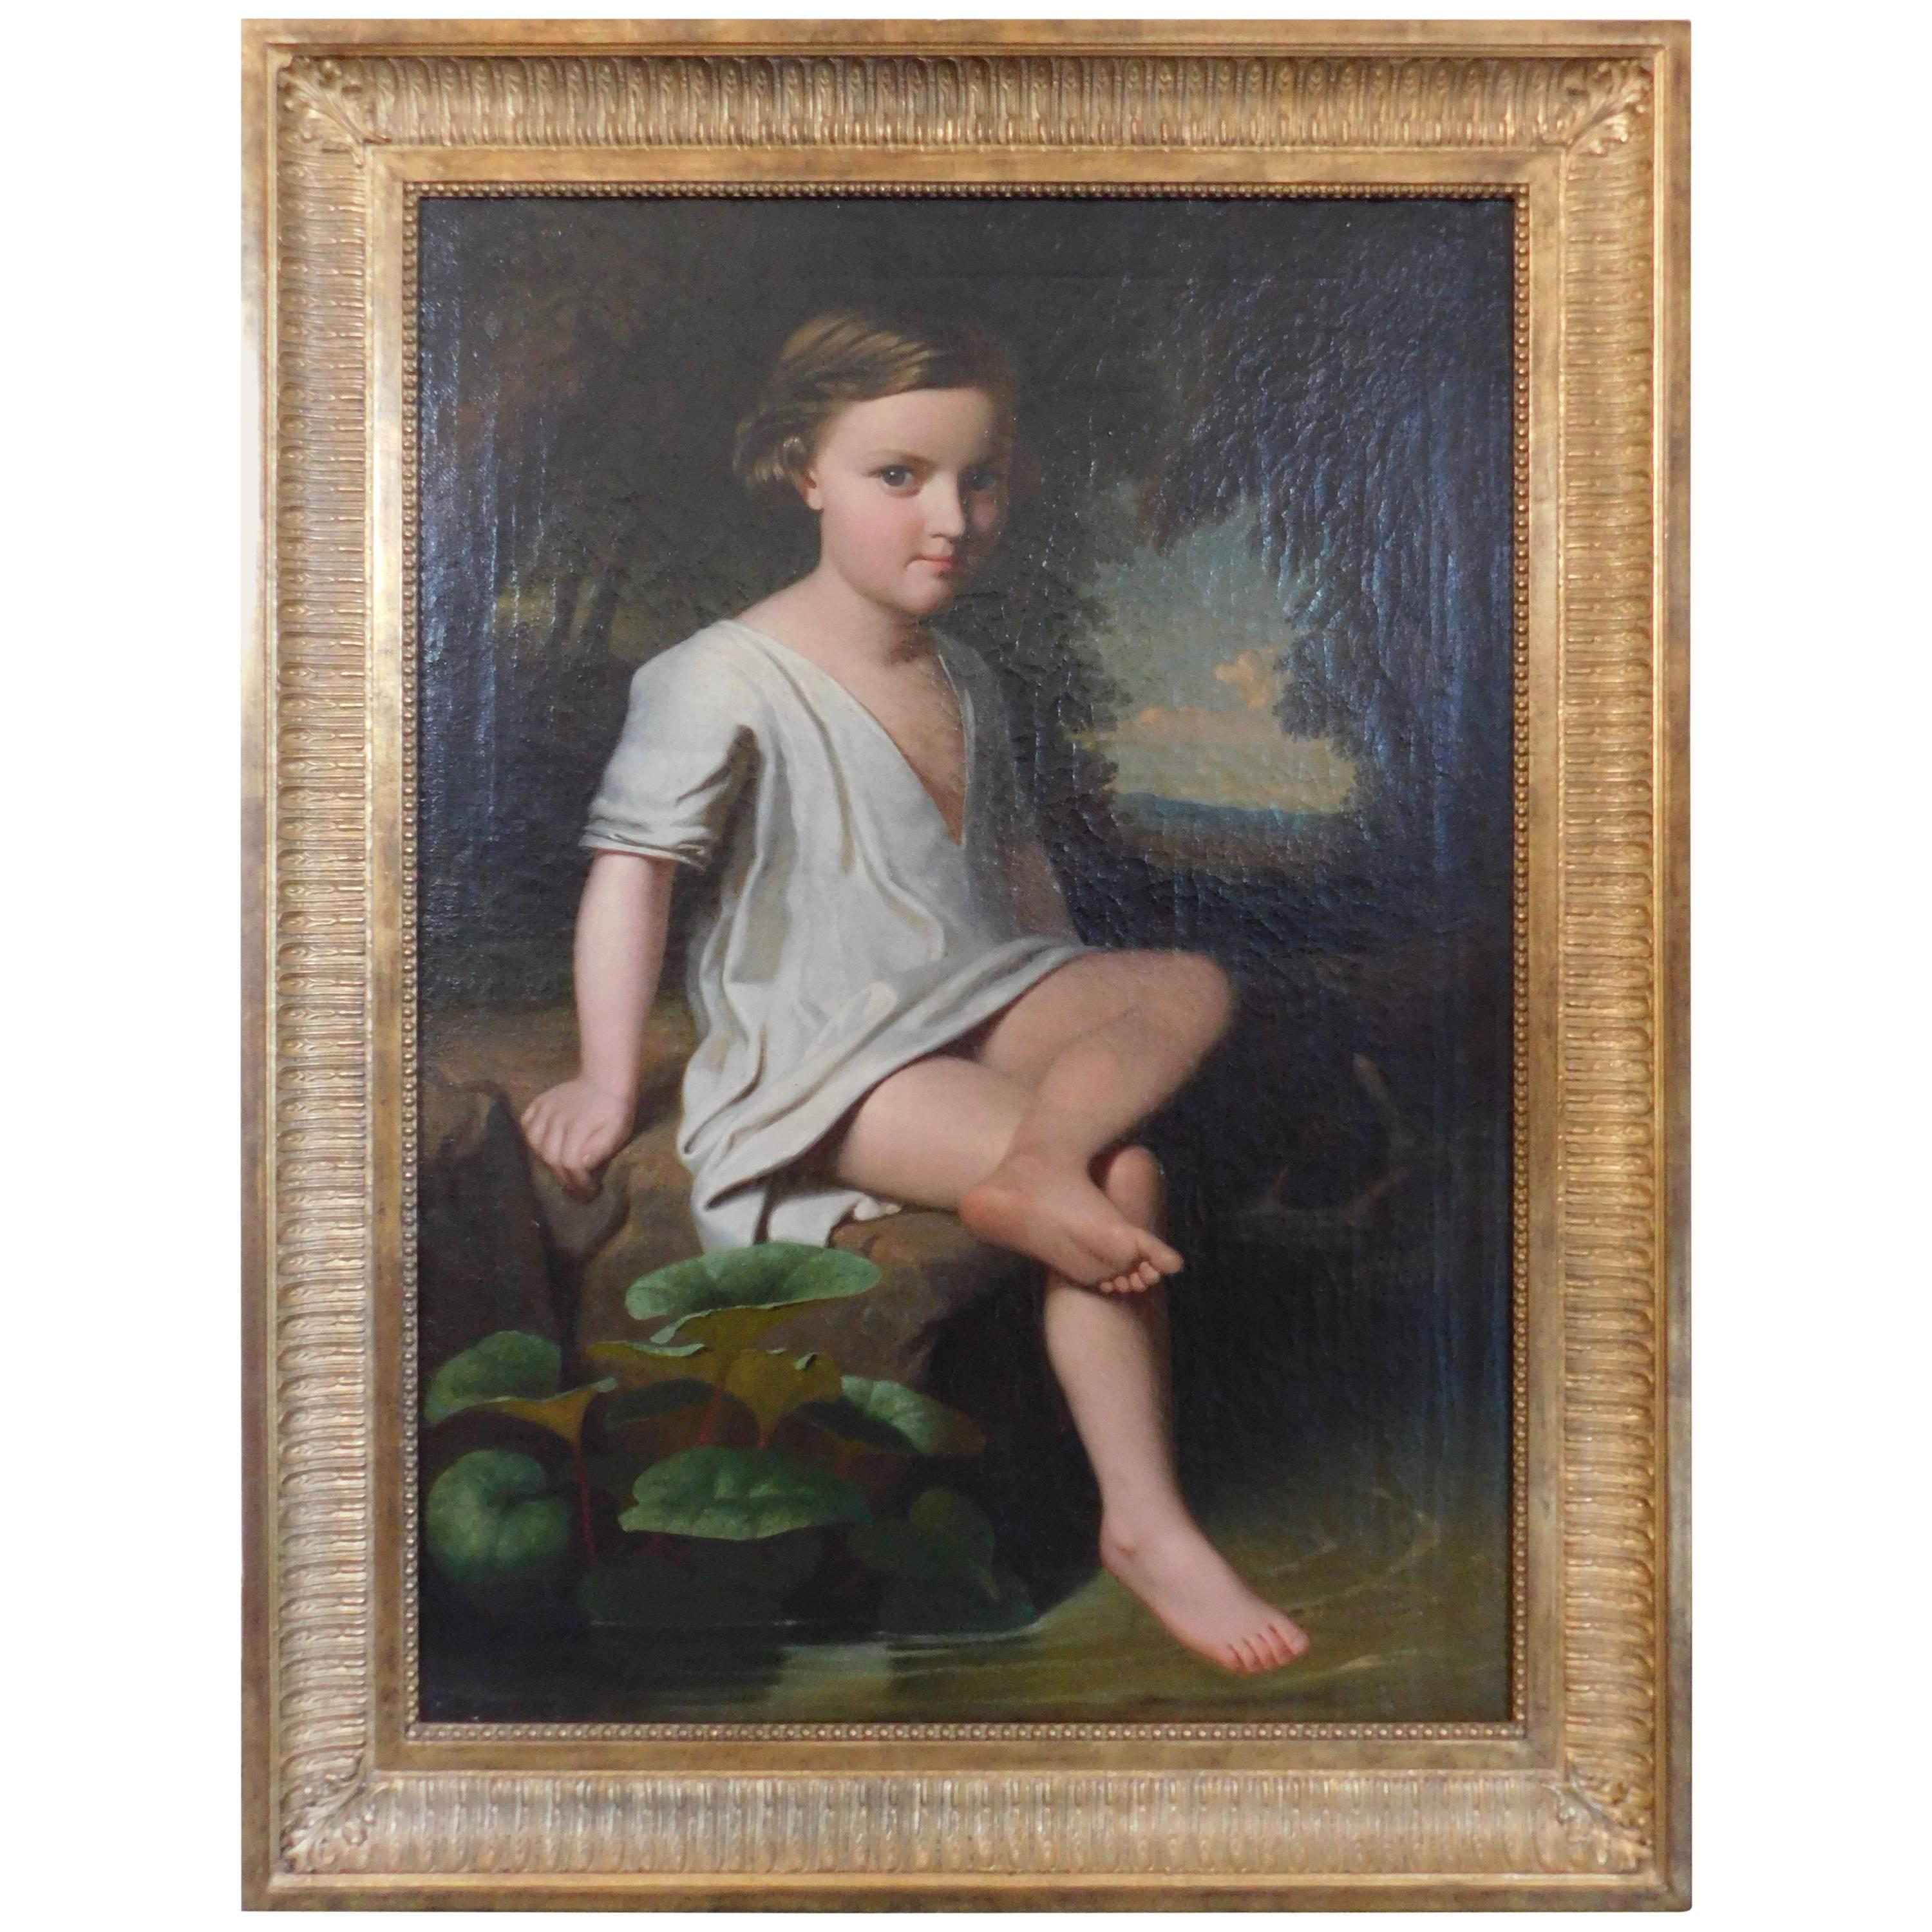 English Regency Painting of a Young Boy Sitting at a Pond, circa 1820